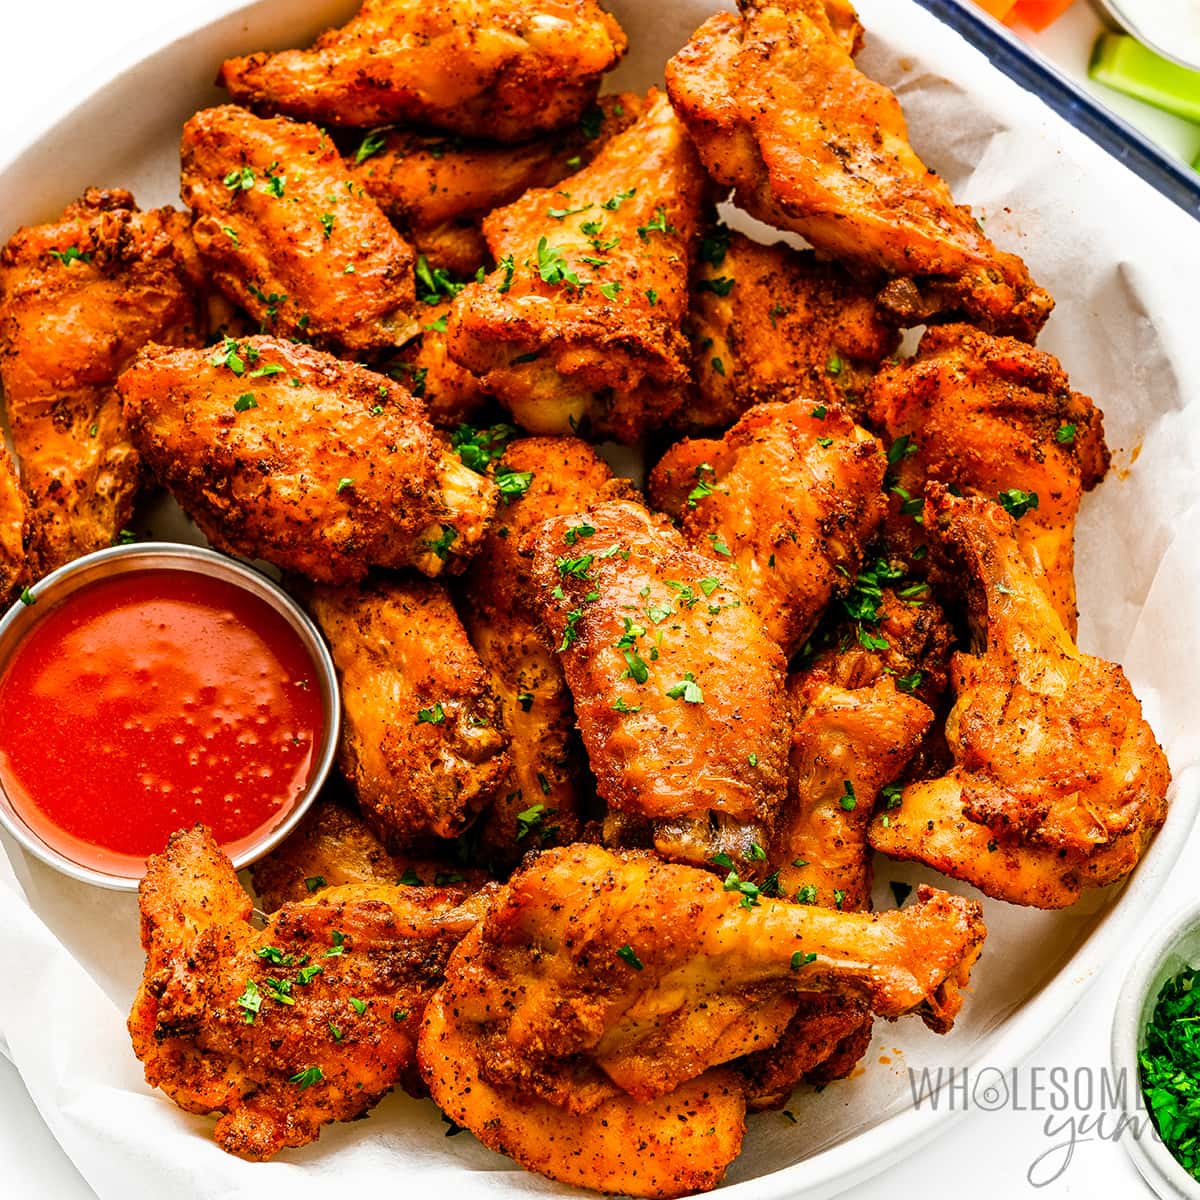 Baked chicken wings on a plate with dipping sauce.